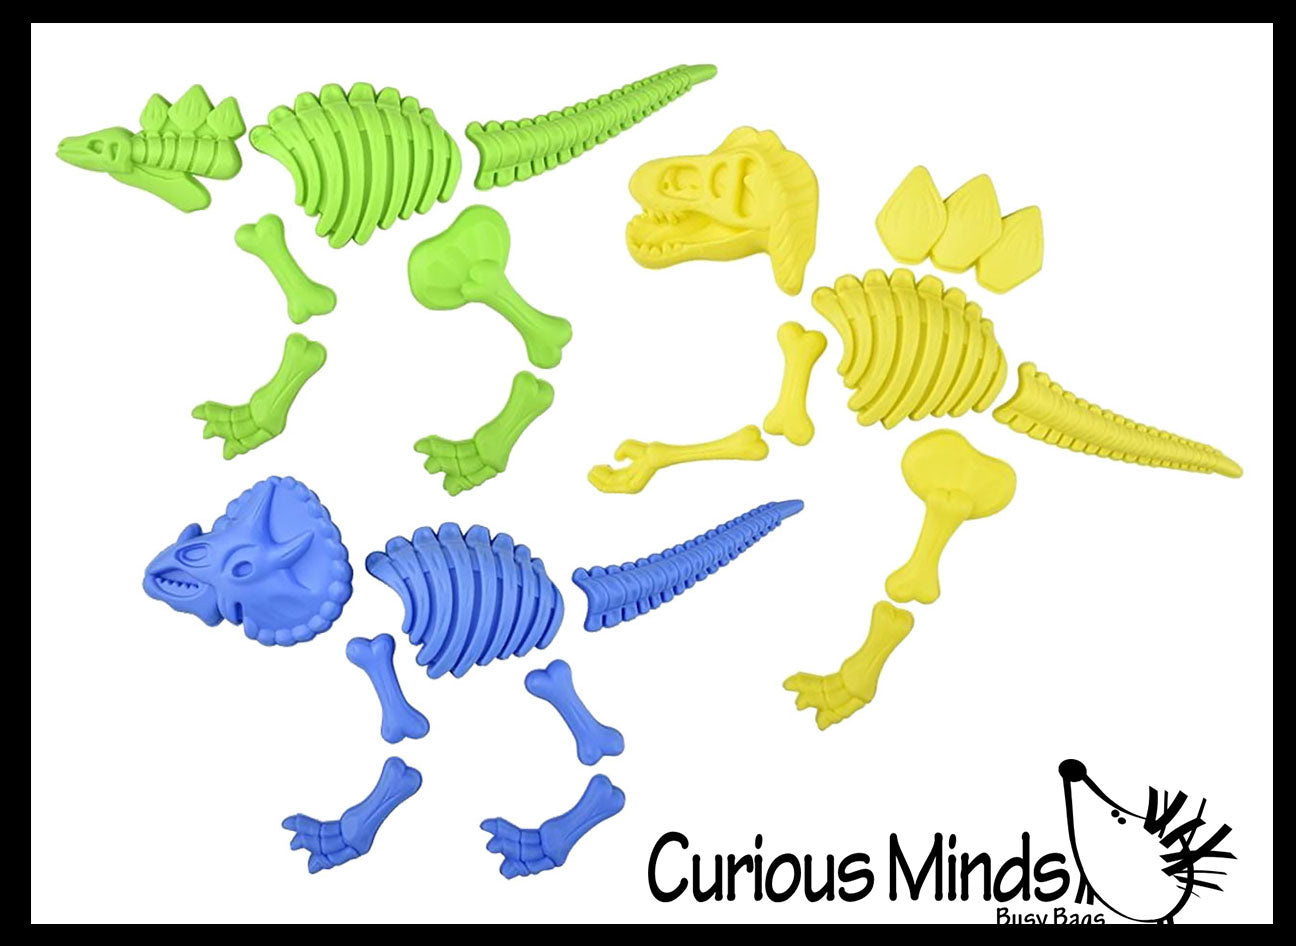  Zugar Land Dinosaur Fossil Sand Mold Beach Set (3 Dinosaurs  Yellow, Green and Blue) Plastic. 22 Pcs. Young Paelontologist Kit. in Mesh  Bag. : Toys & Games